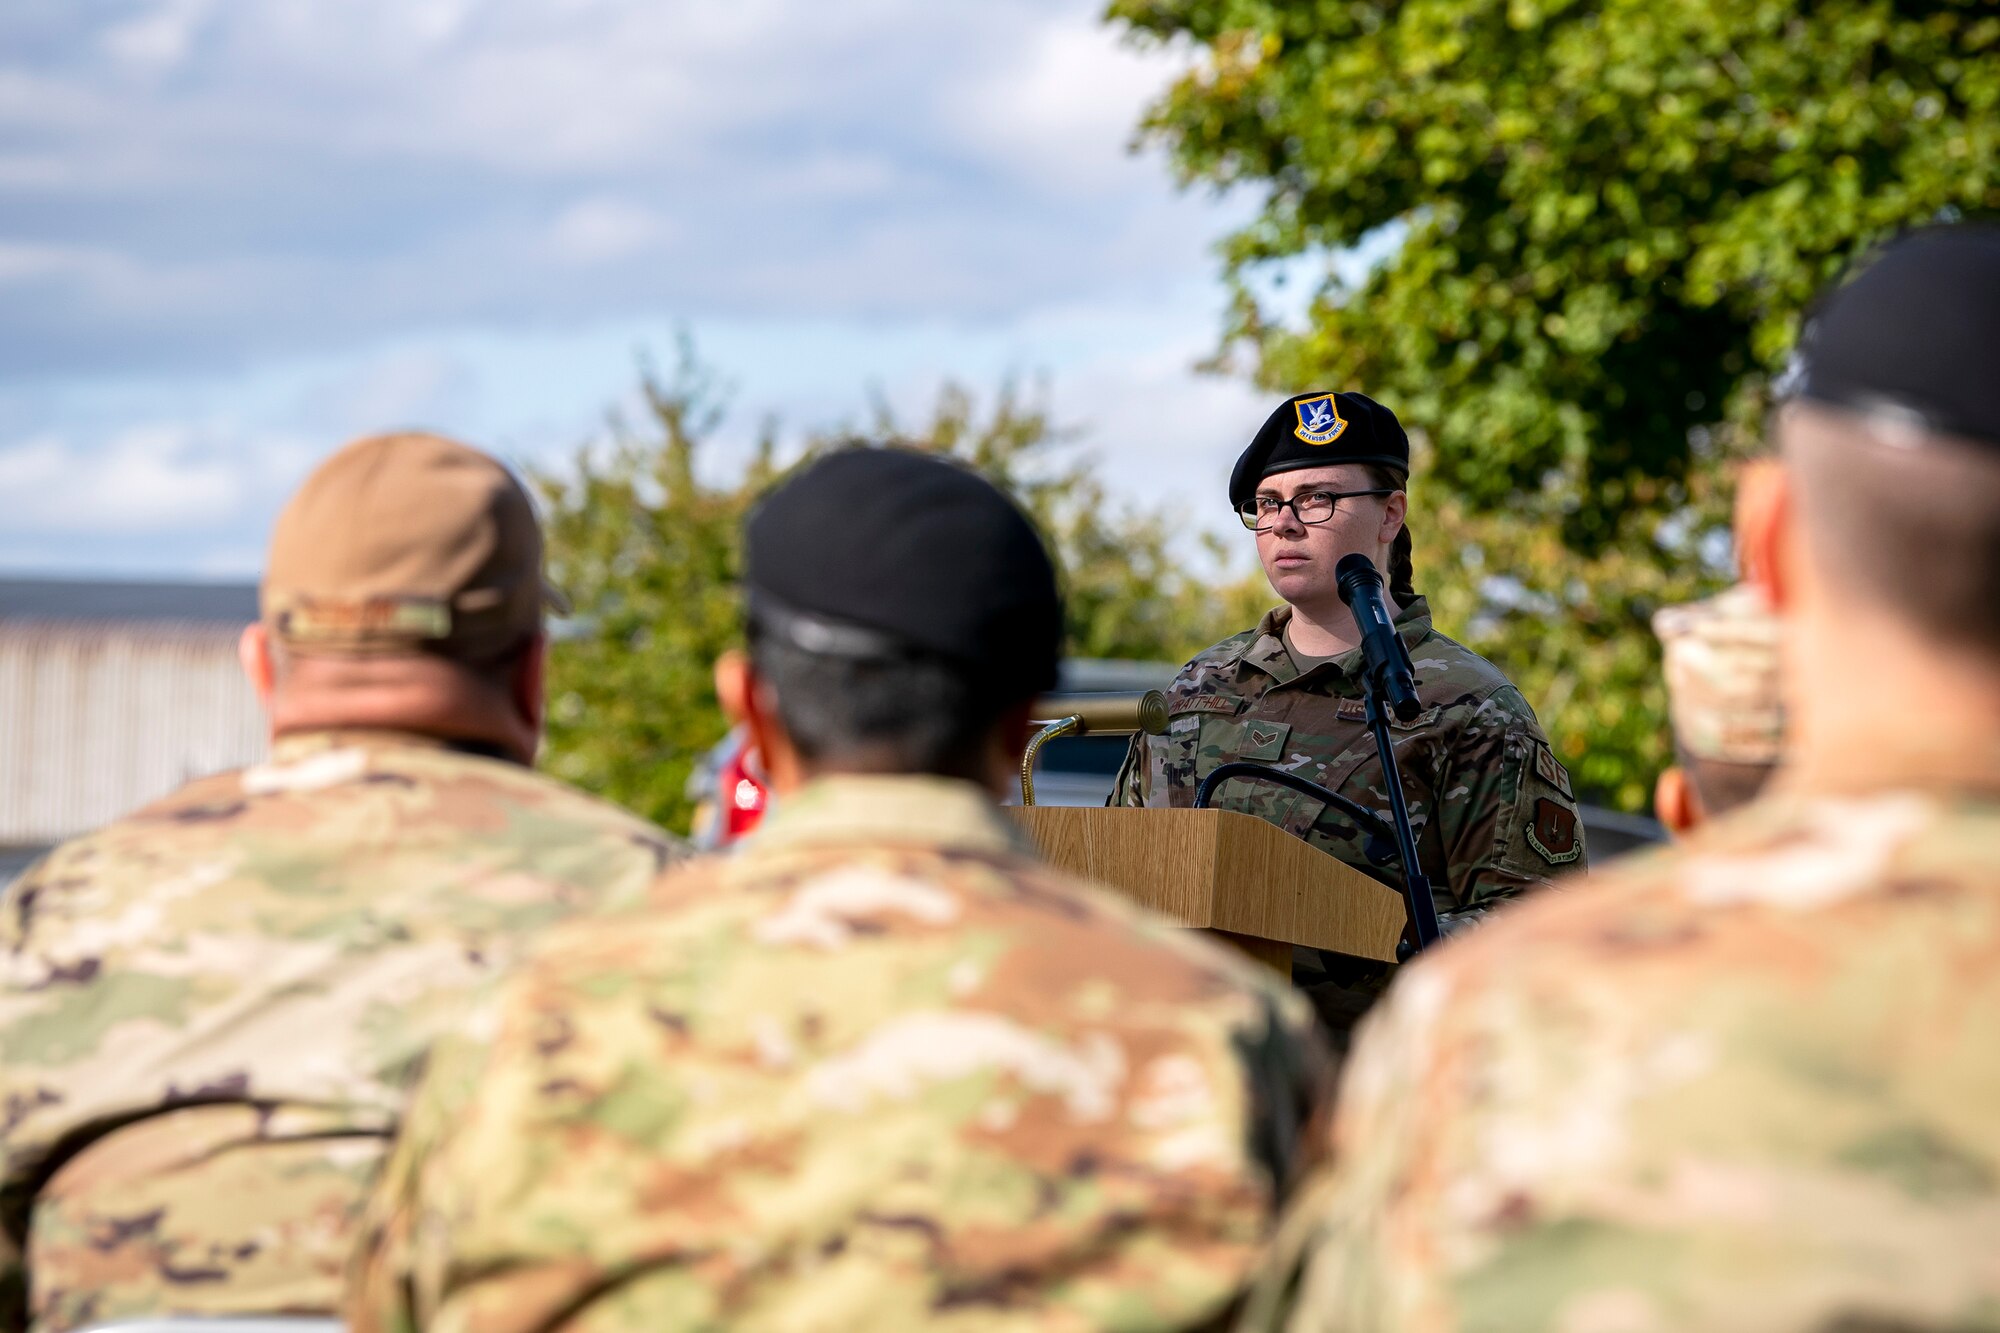 Senior Airman Maysi Pratt-Hill, 422d Security Forces Squadron resource advisor, speaks during a retreat ceremony at RAF Croughton, England, Oct. 15, 2021. The ceremony concluded Police week in which defenders from the 422d and 423rd SFS paid homage to those who lost their lives in the line of duty. (U.S. Air Force photo by Senior Airman Eugene Oliver)